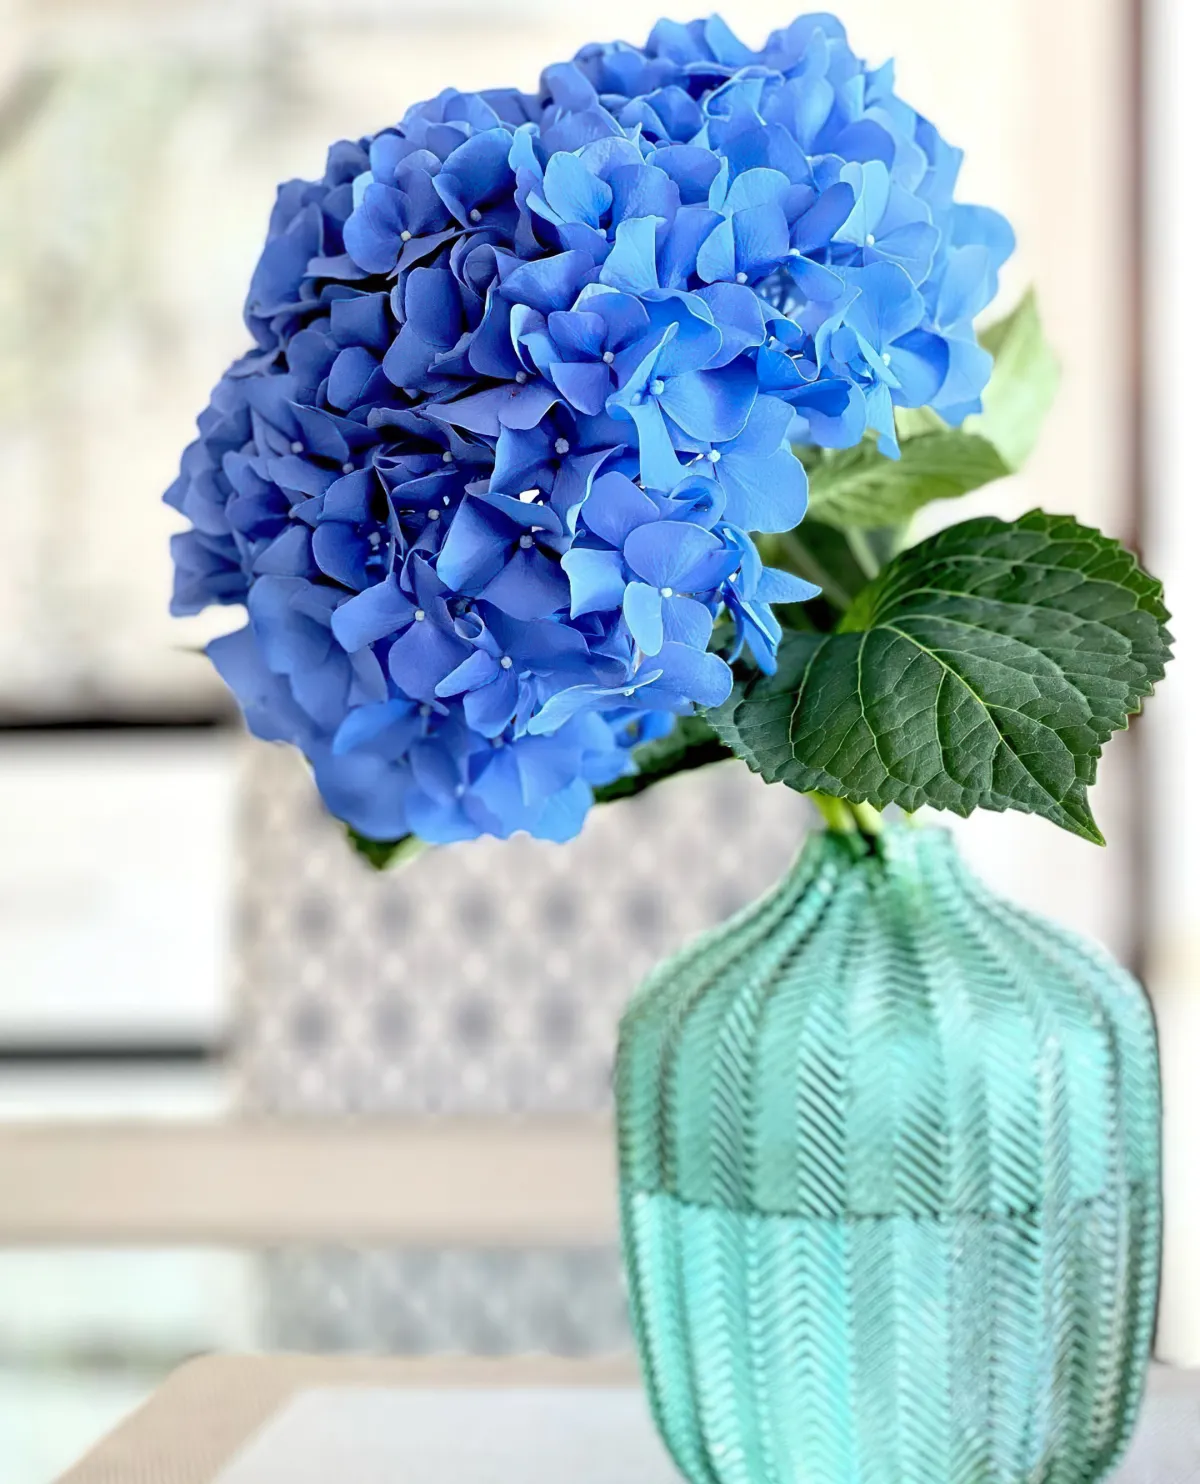 Decorate the dining table with blue hydrangeas in a glass vase.